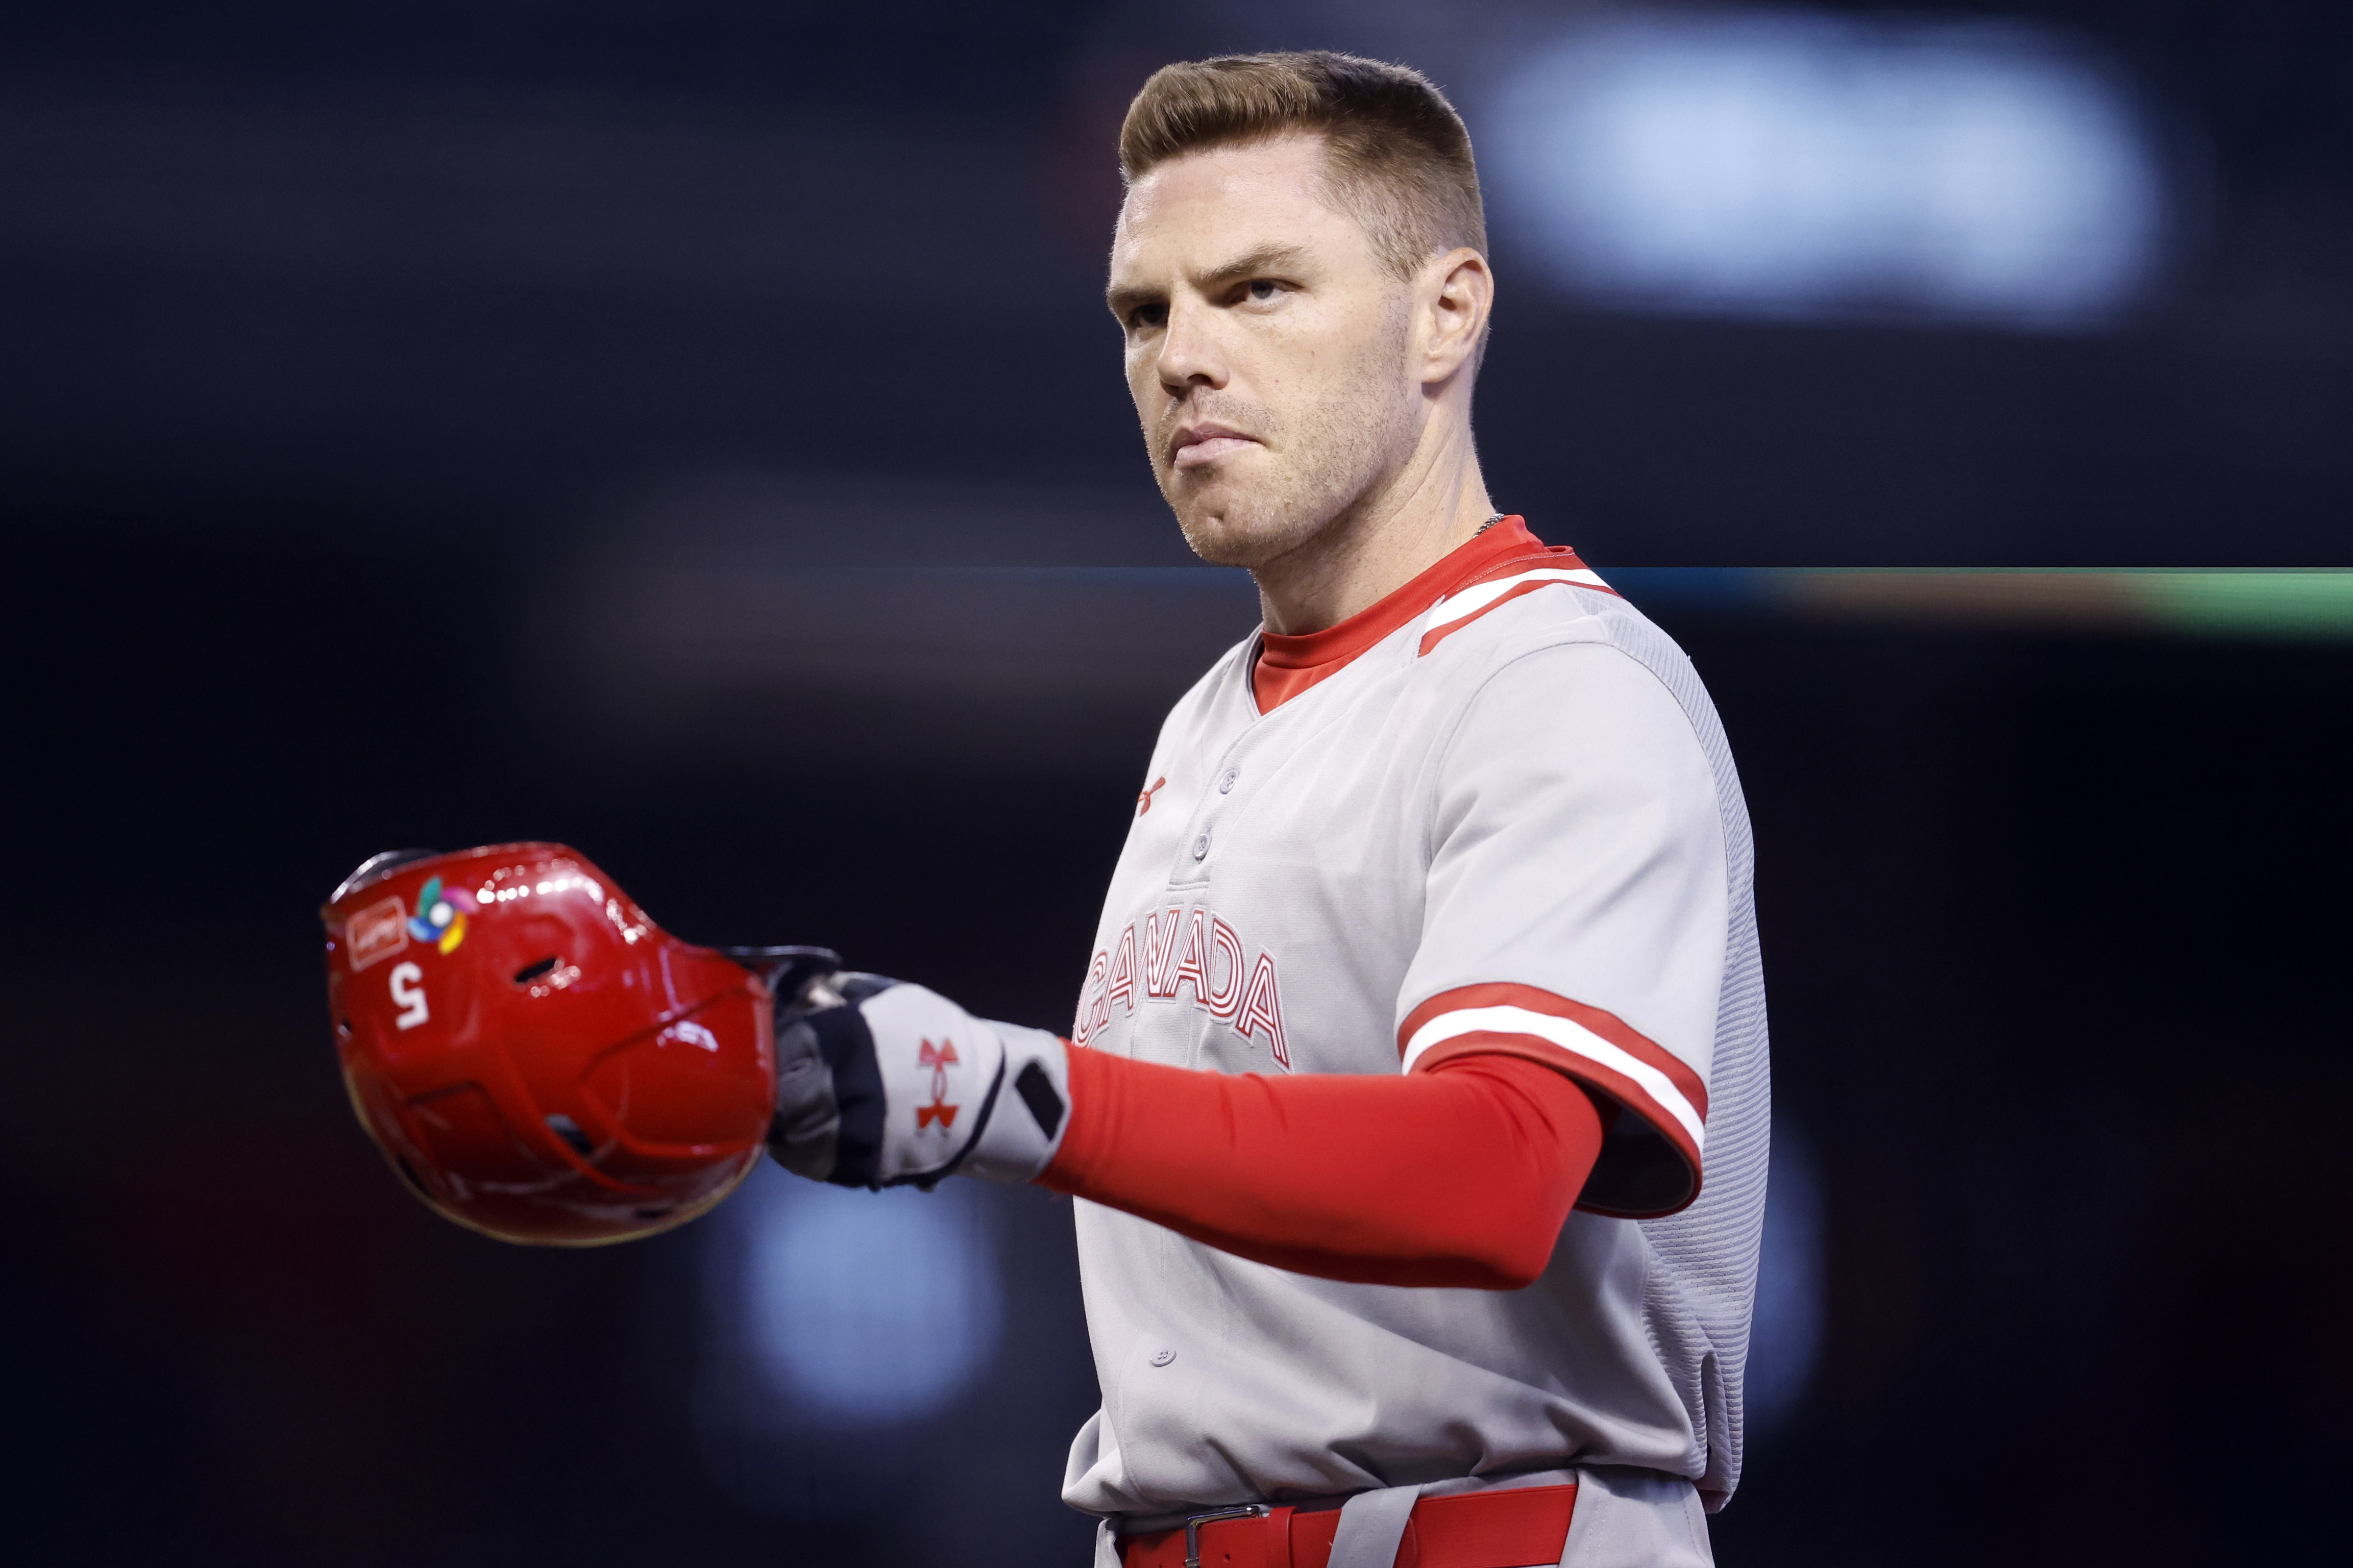 Freddie Freeman #5 of Team Canada removes his batting helmet after the final out in the second inning of the World Baseball Classic Pool C game against Team Colombia at Chase Field on March 14, 2023 in Phoenix, Arizona.